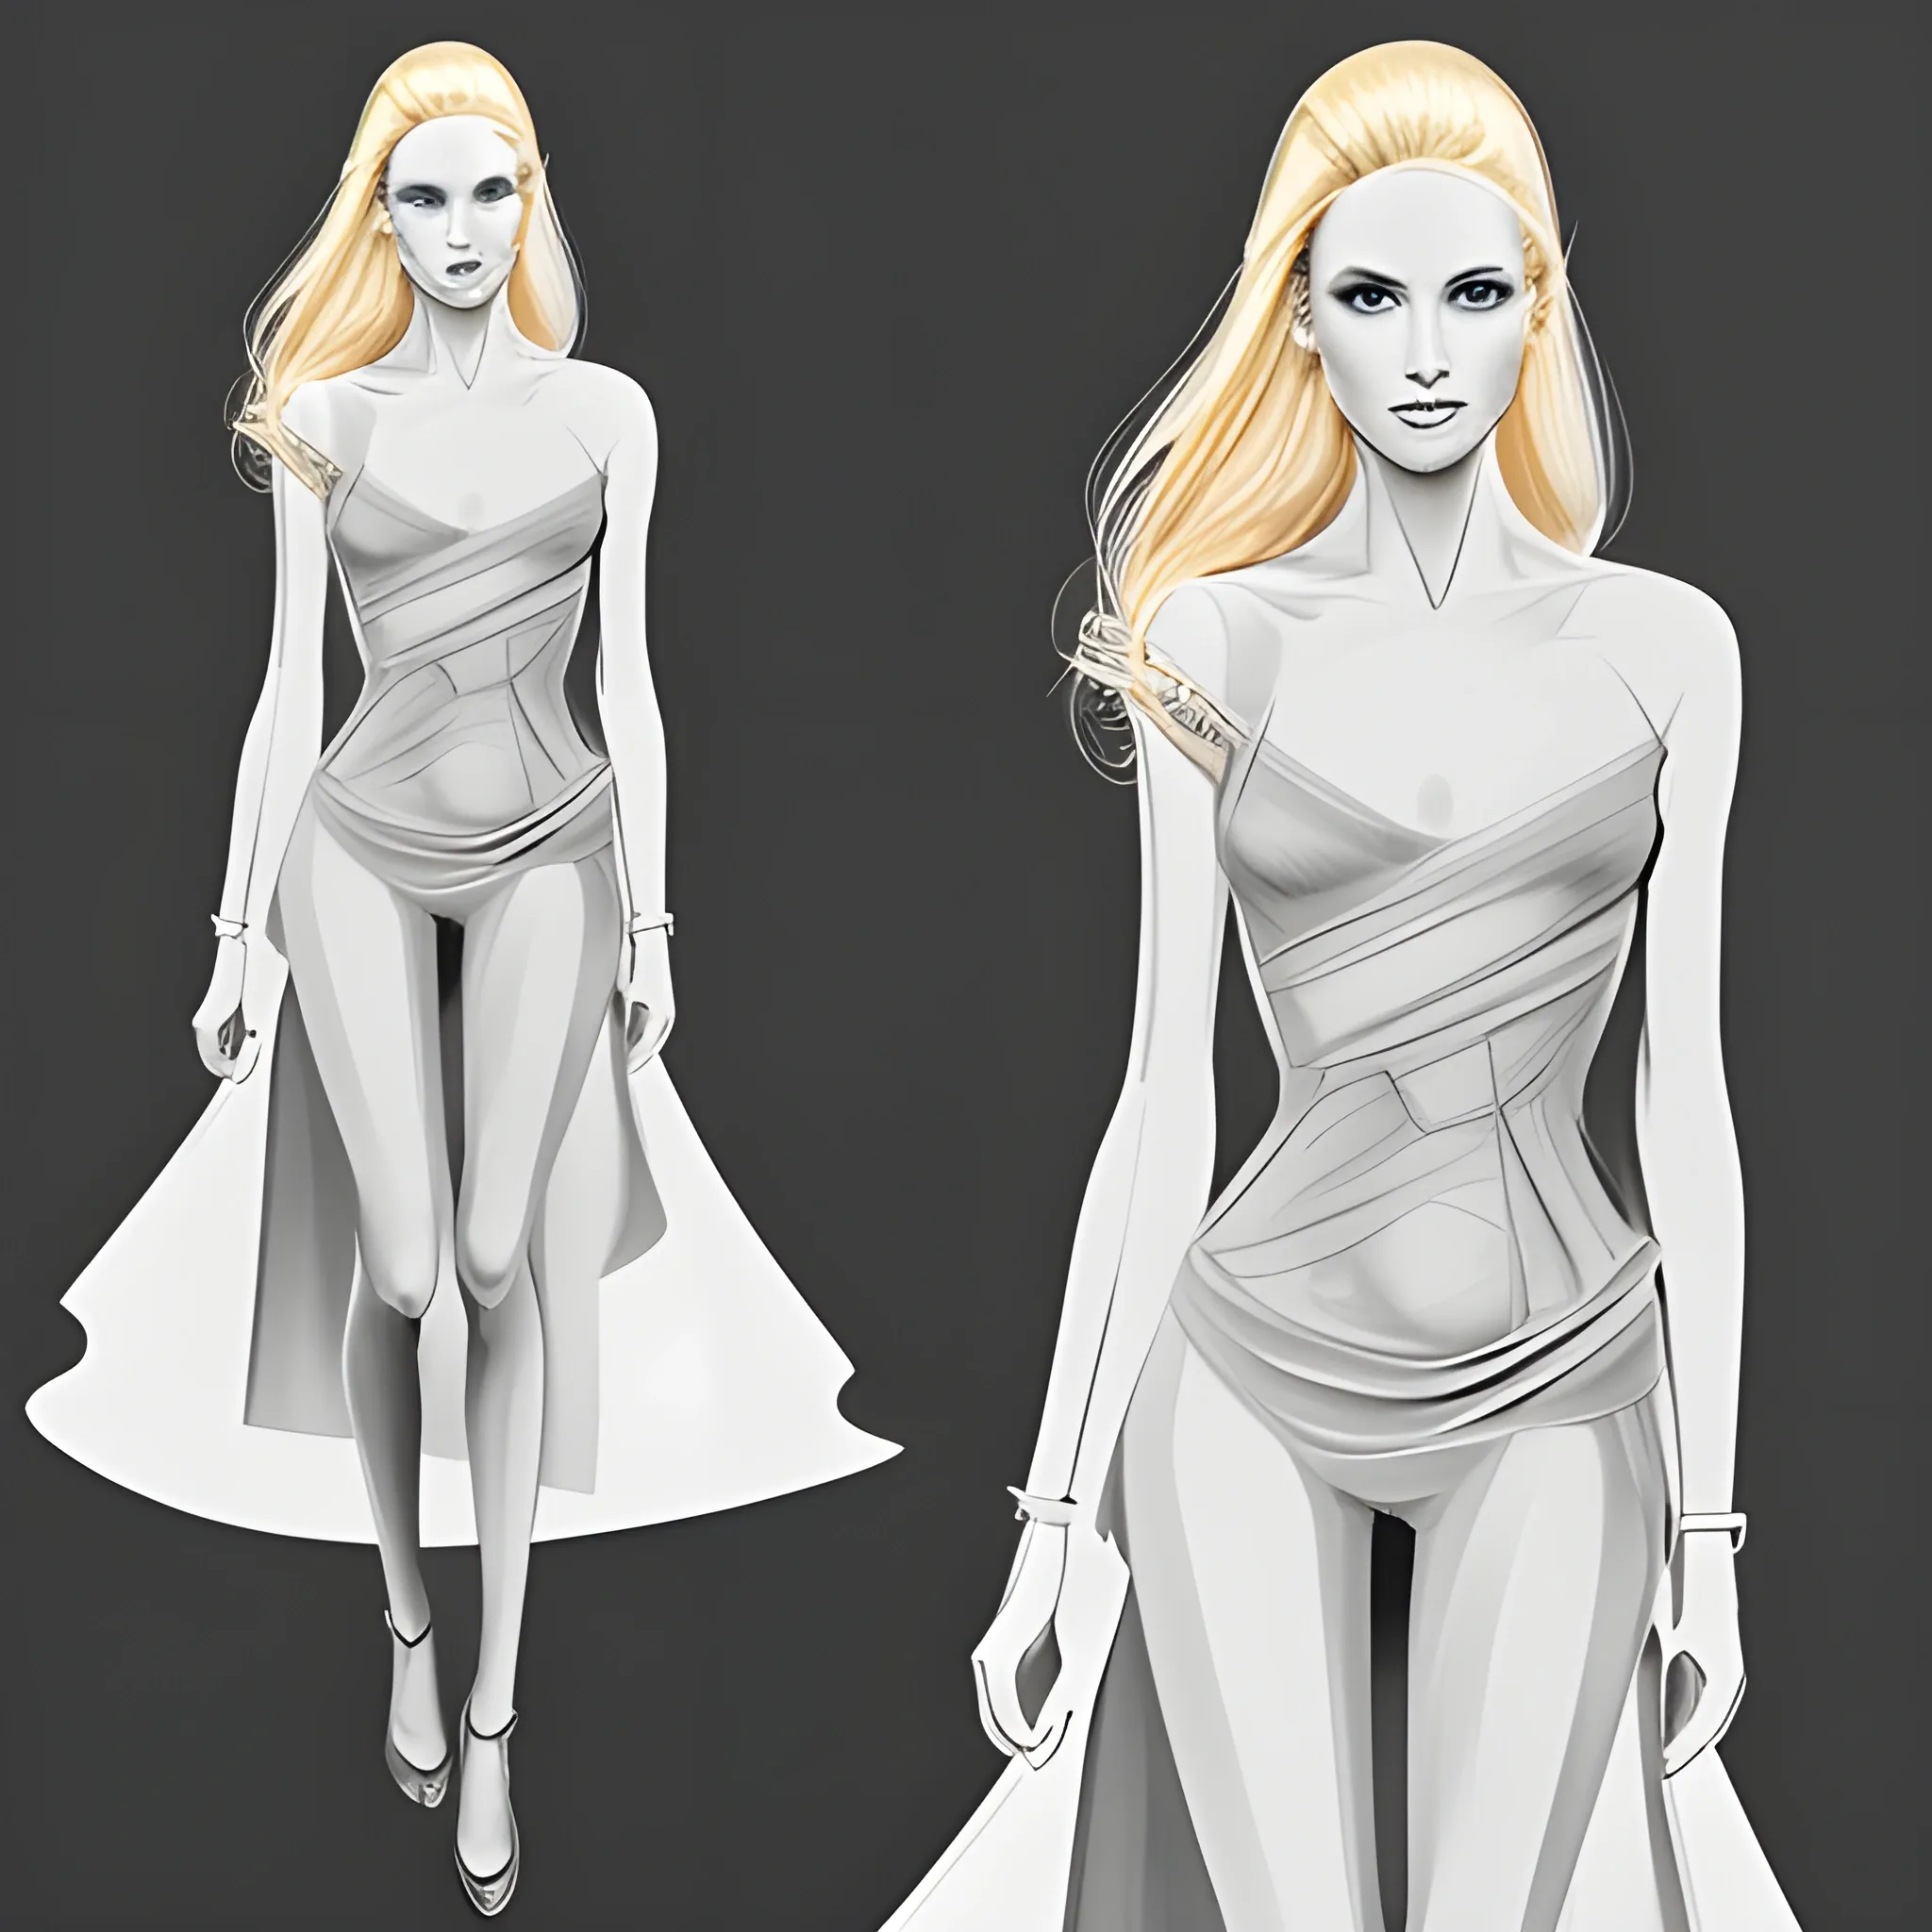 fashion croquis of 10” for a base to do fashion illustration. skin rendered. no garments on just the figure. face rendered with blonde hair

digital art